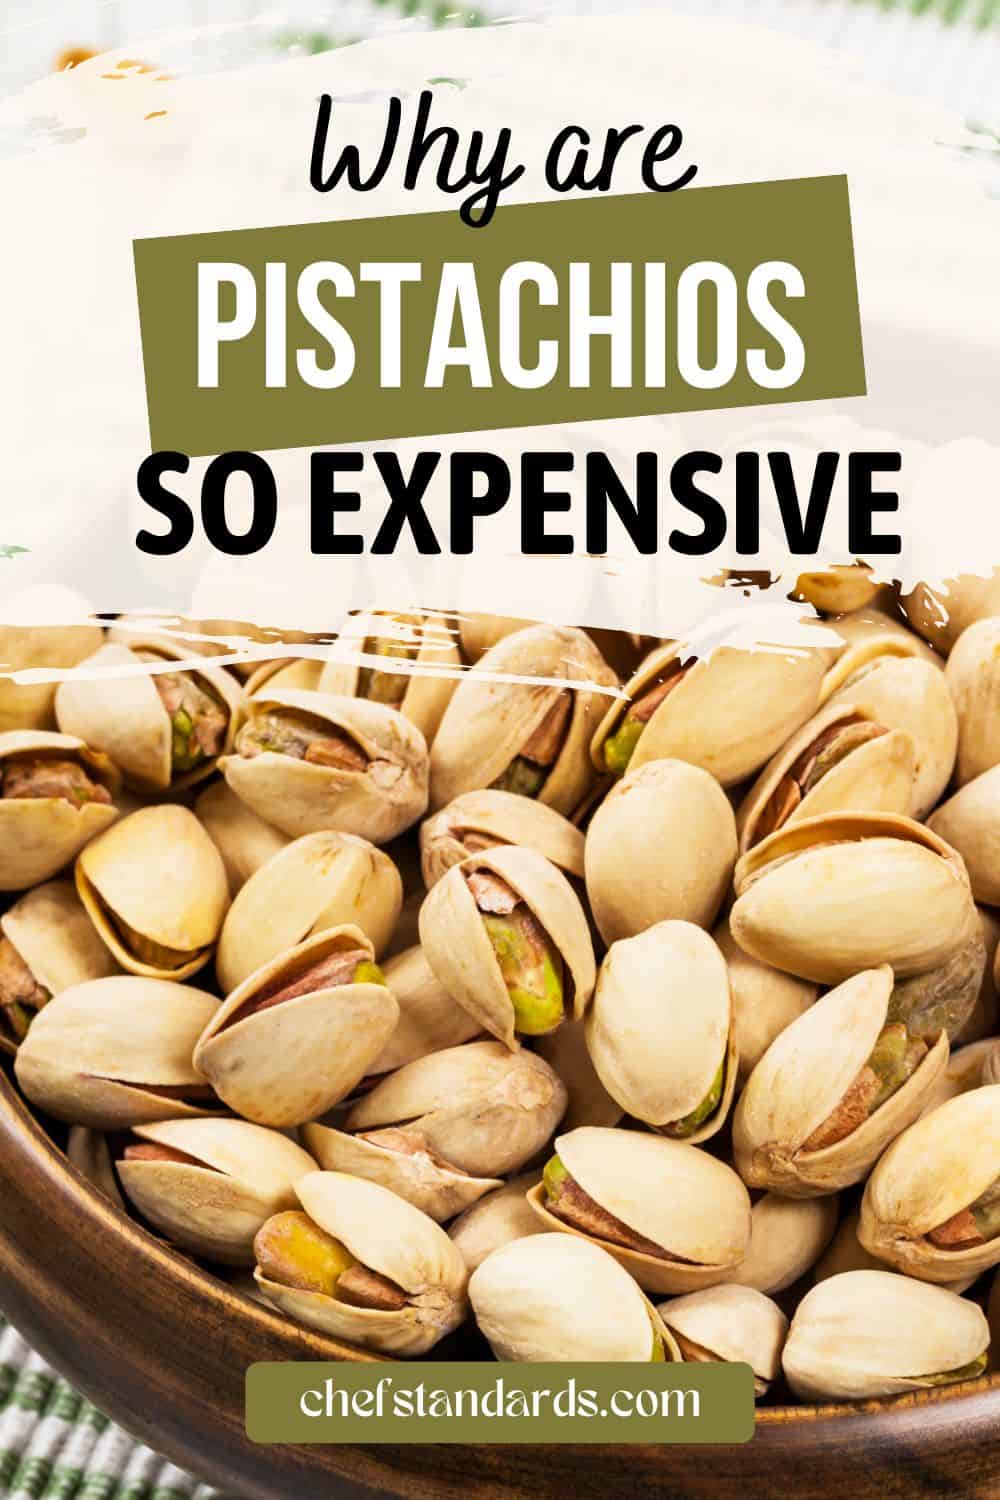 Here Are 12 Reasons Why Are Pistachios So Expensive